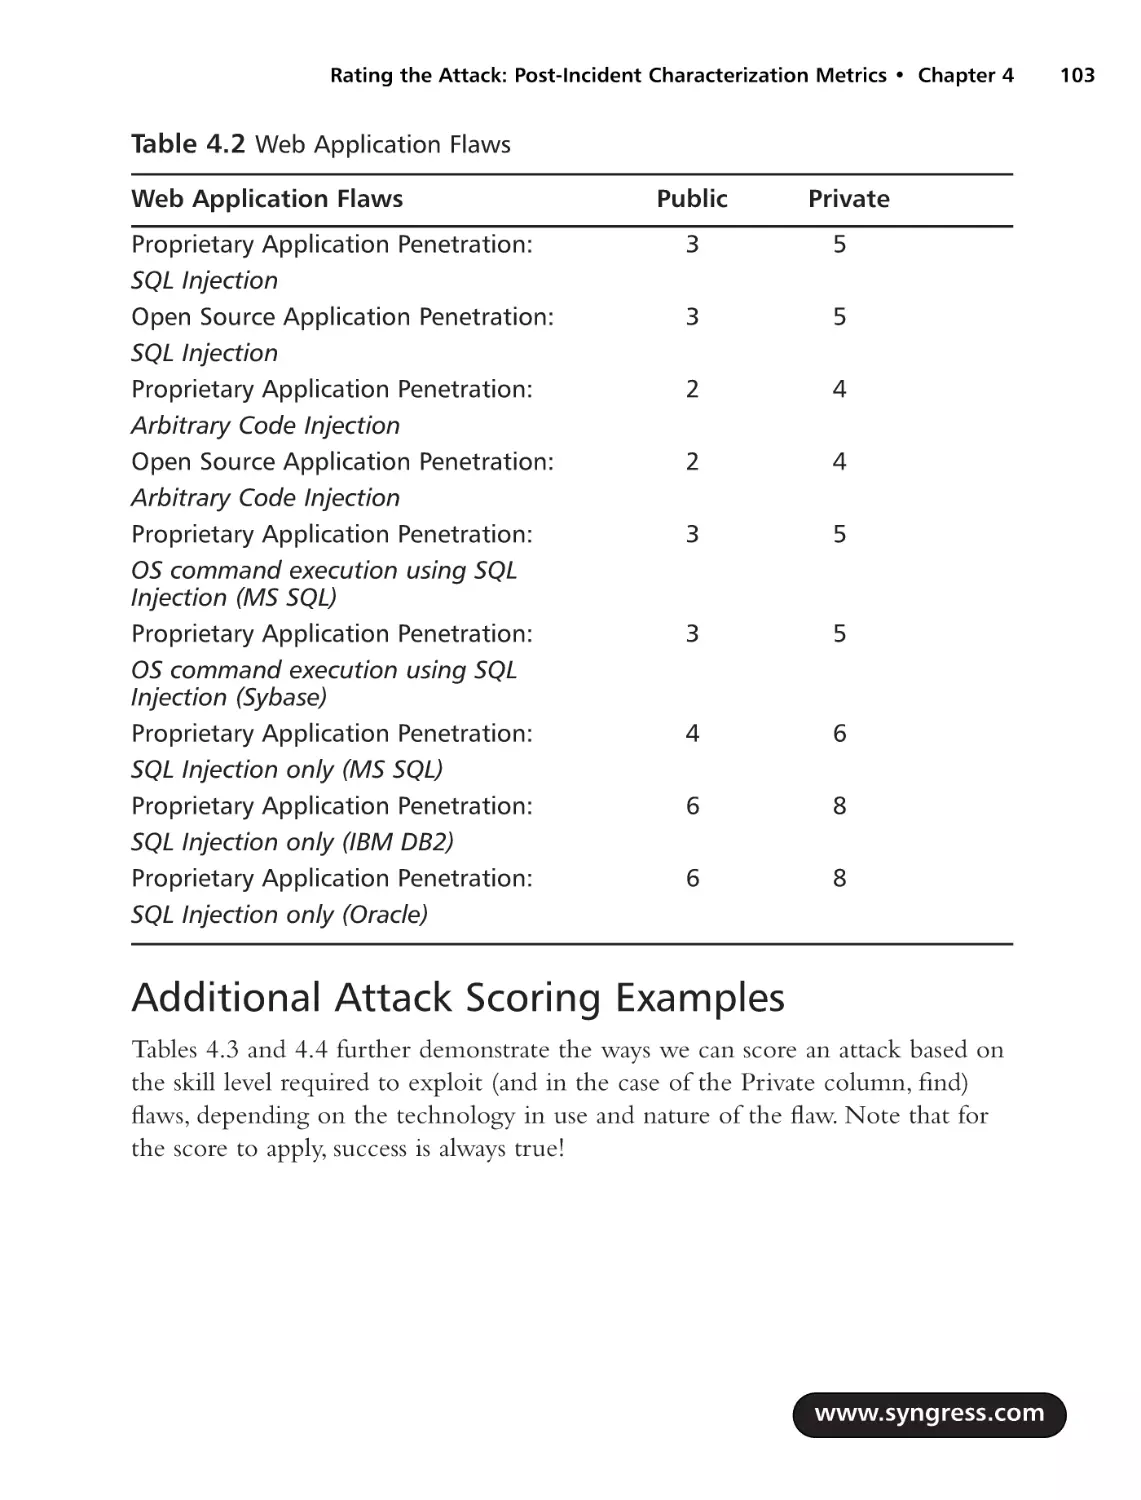 Additional Attack Scoring Examples